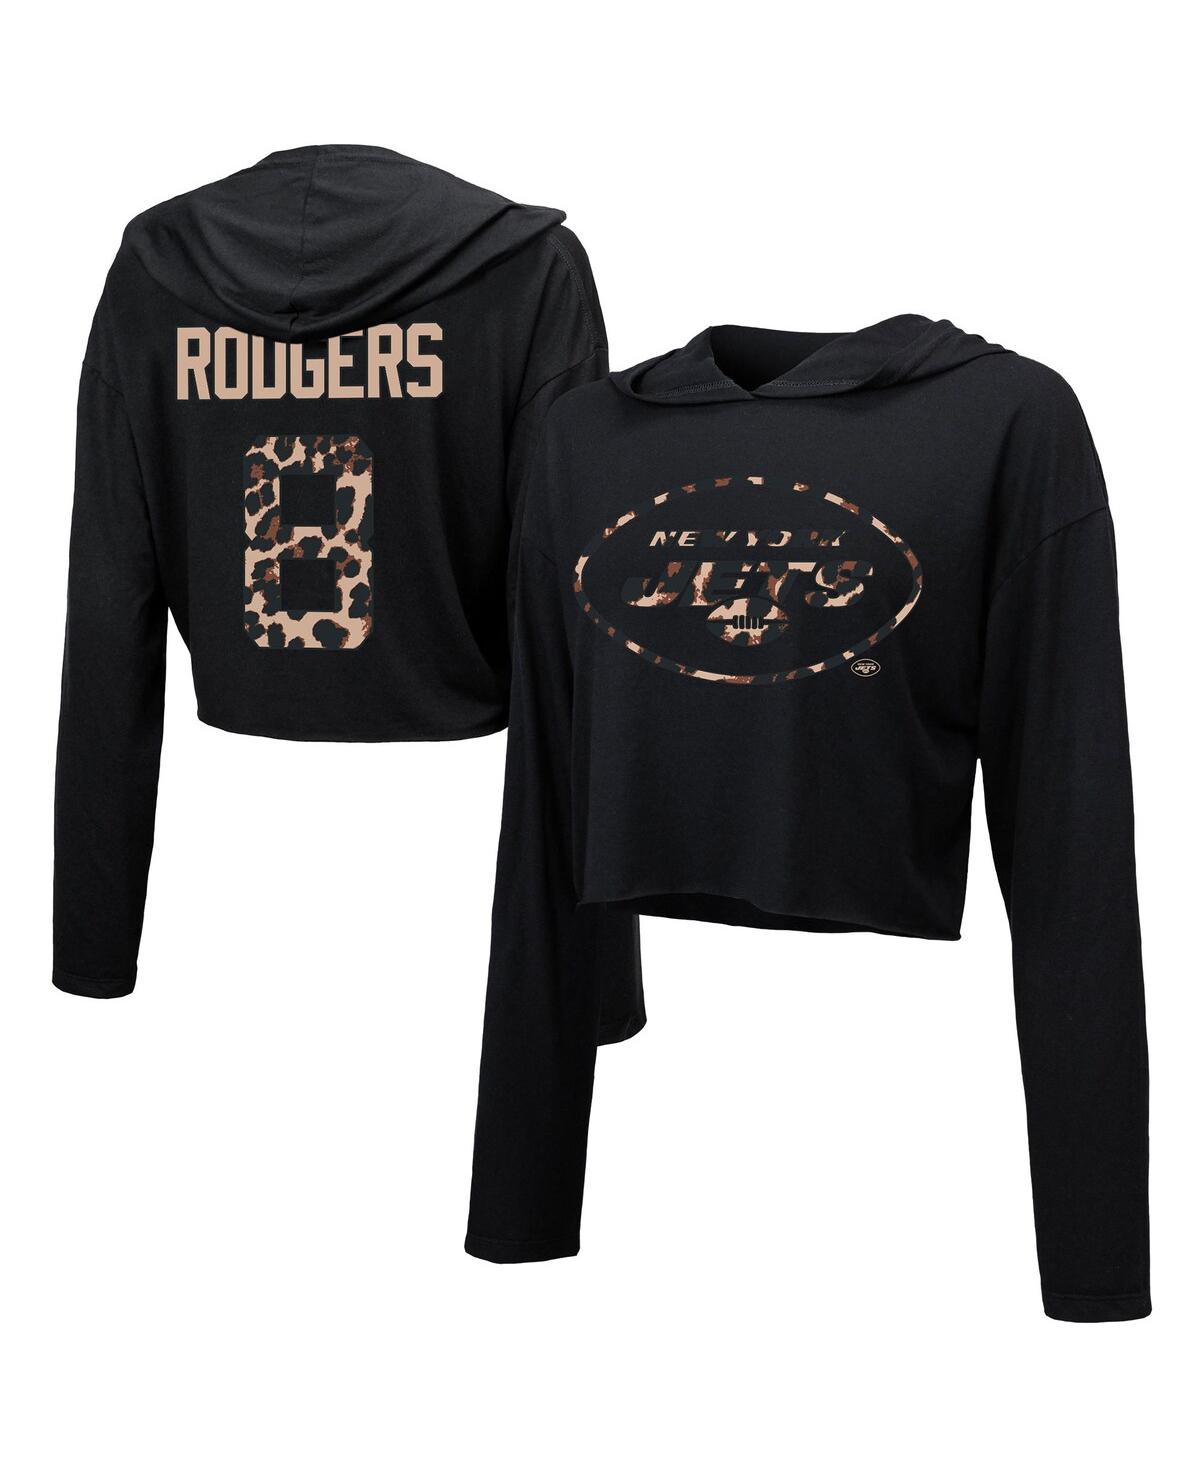 Women's Majestic Threads Aaron Rodgers Black New York Jets Leopard Player Name and Number Long Sleeve Cropped Hoodie T-shirt - Black